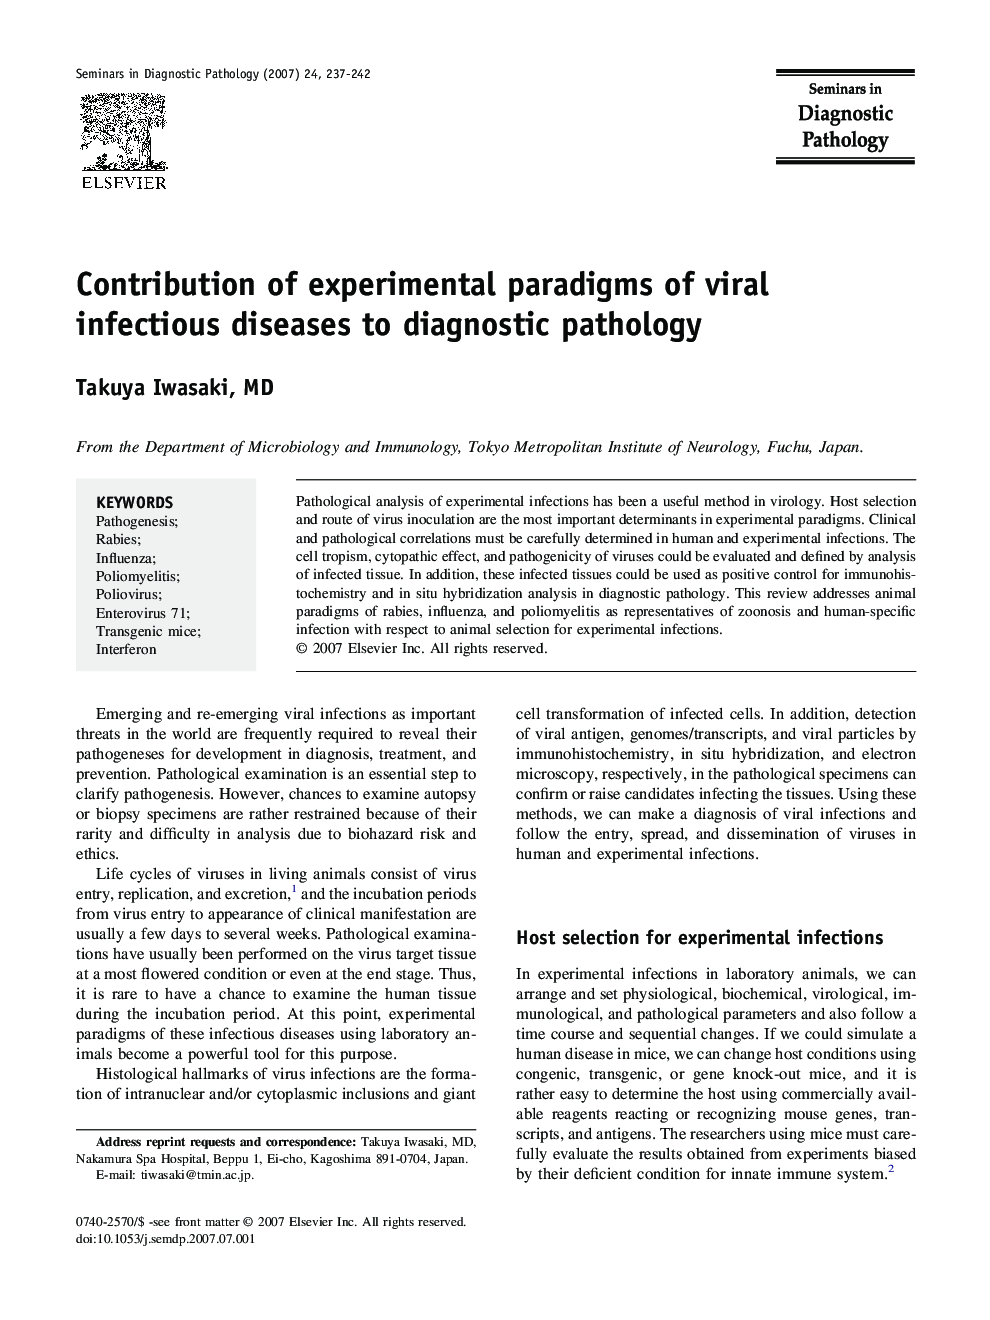 Contribution of experimental paradigms of viral infectious diseases to diagnostic pathology